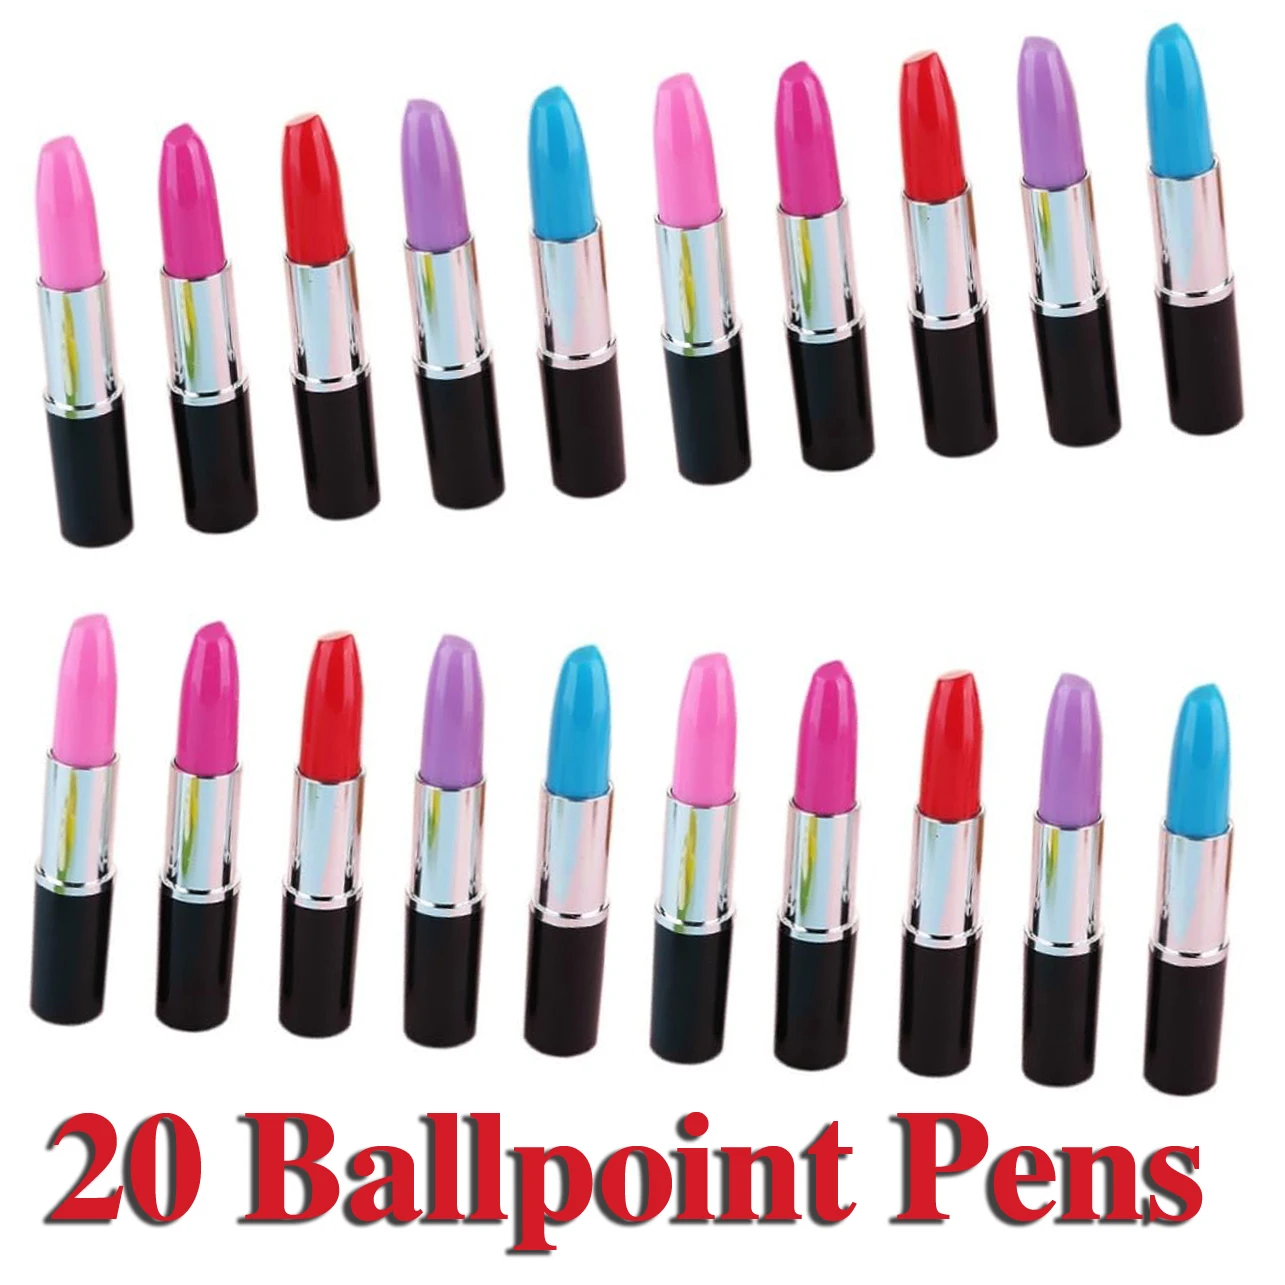 20pcs Lipstick Ball-Point Pen Creative Beautiful Ball-Point Pen Lipstick Sign Pen Girl Gift for Home Store School pop 13 17cm large explosion advertising blank paper card sign board retailing store shelf channel point of sale pricing tag